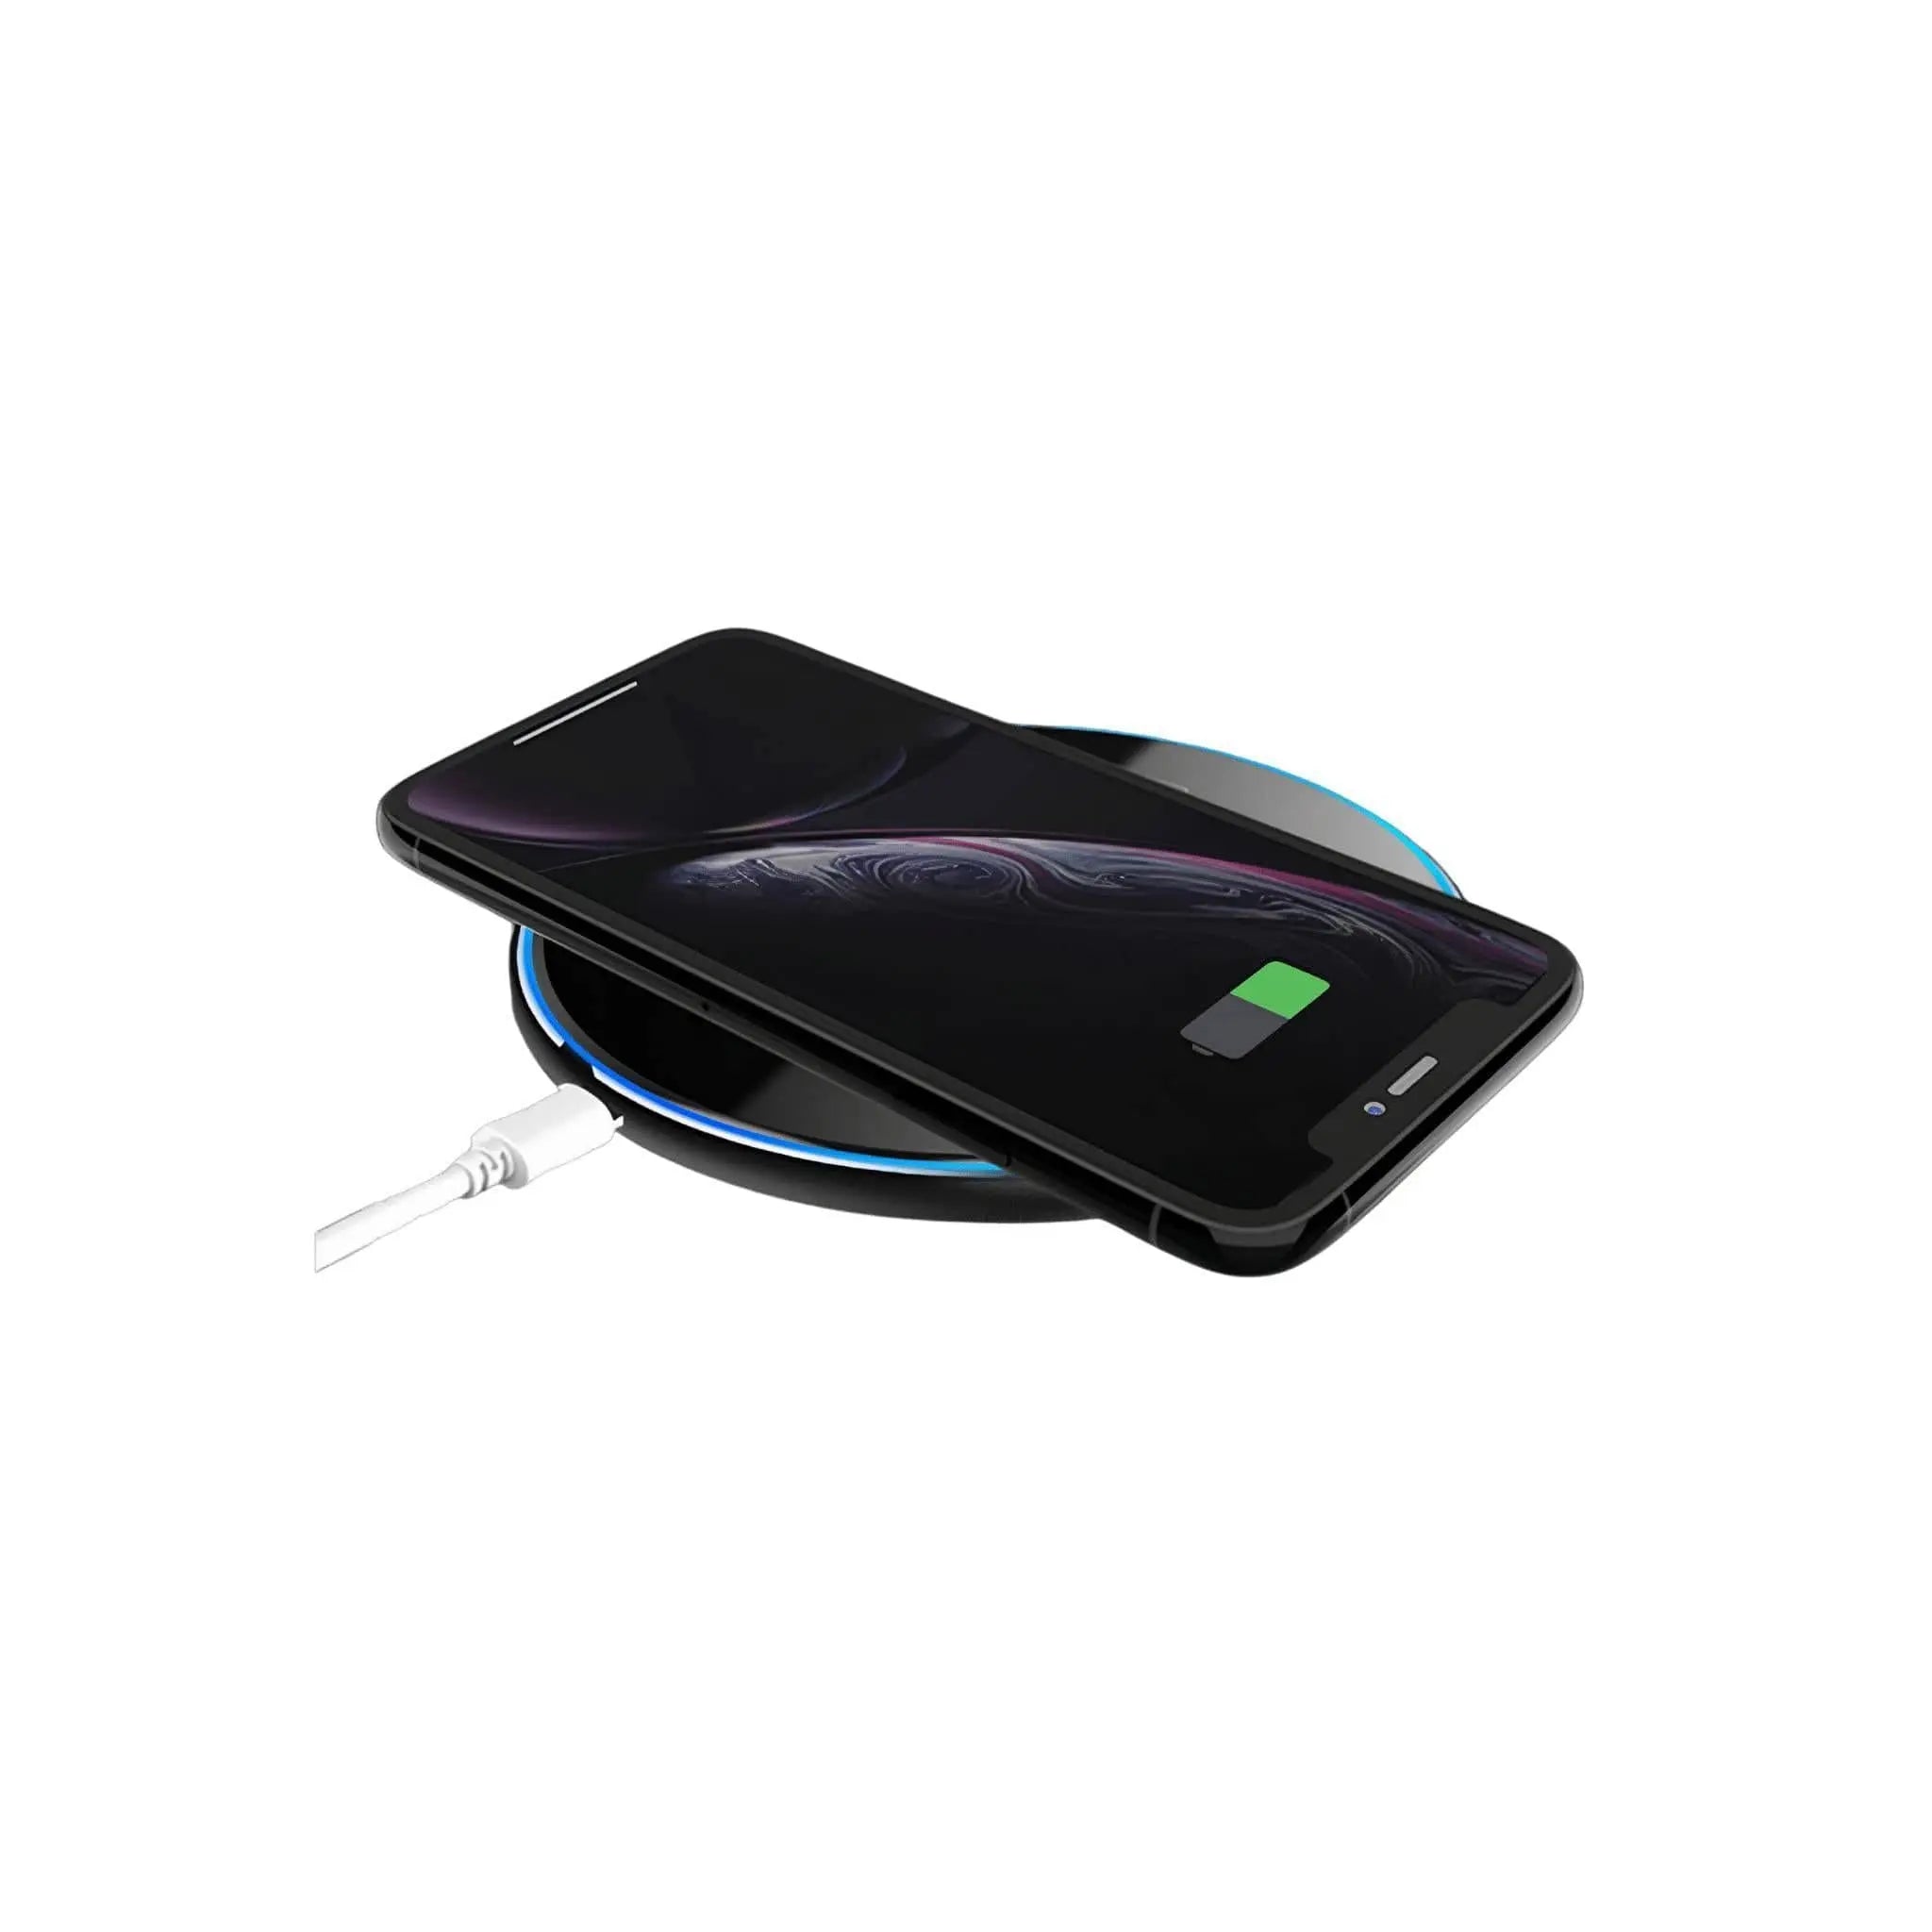 Wireless Qi Charger | Evolved Charger Vital-Power Adapters & Chargers-Evolved Chargers-Evolved Chargers